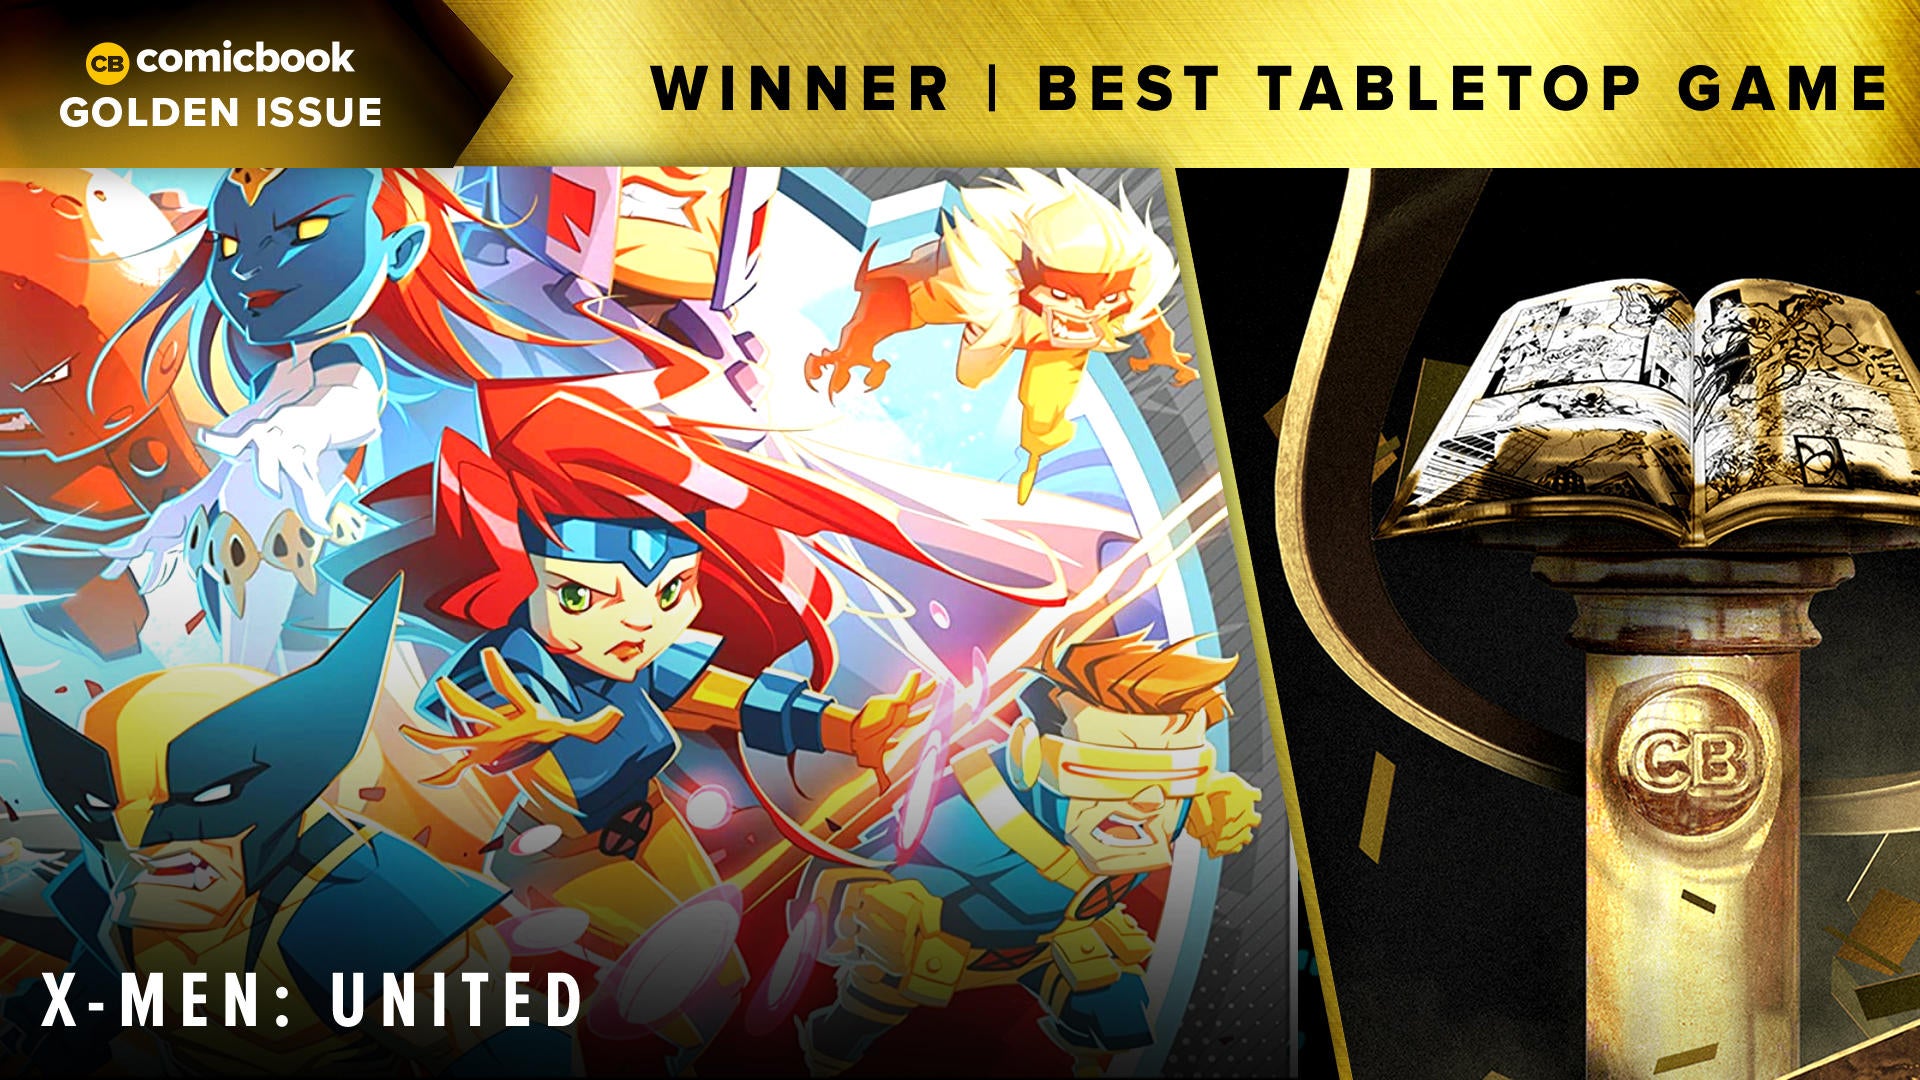 golden-issues-2021-winners-best-tabletop-game